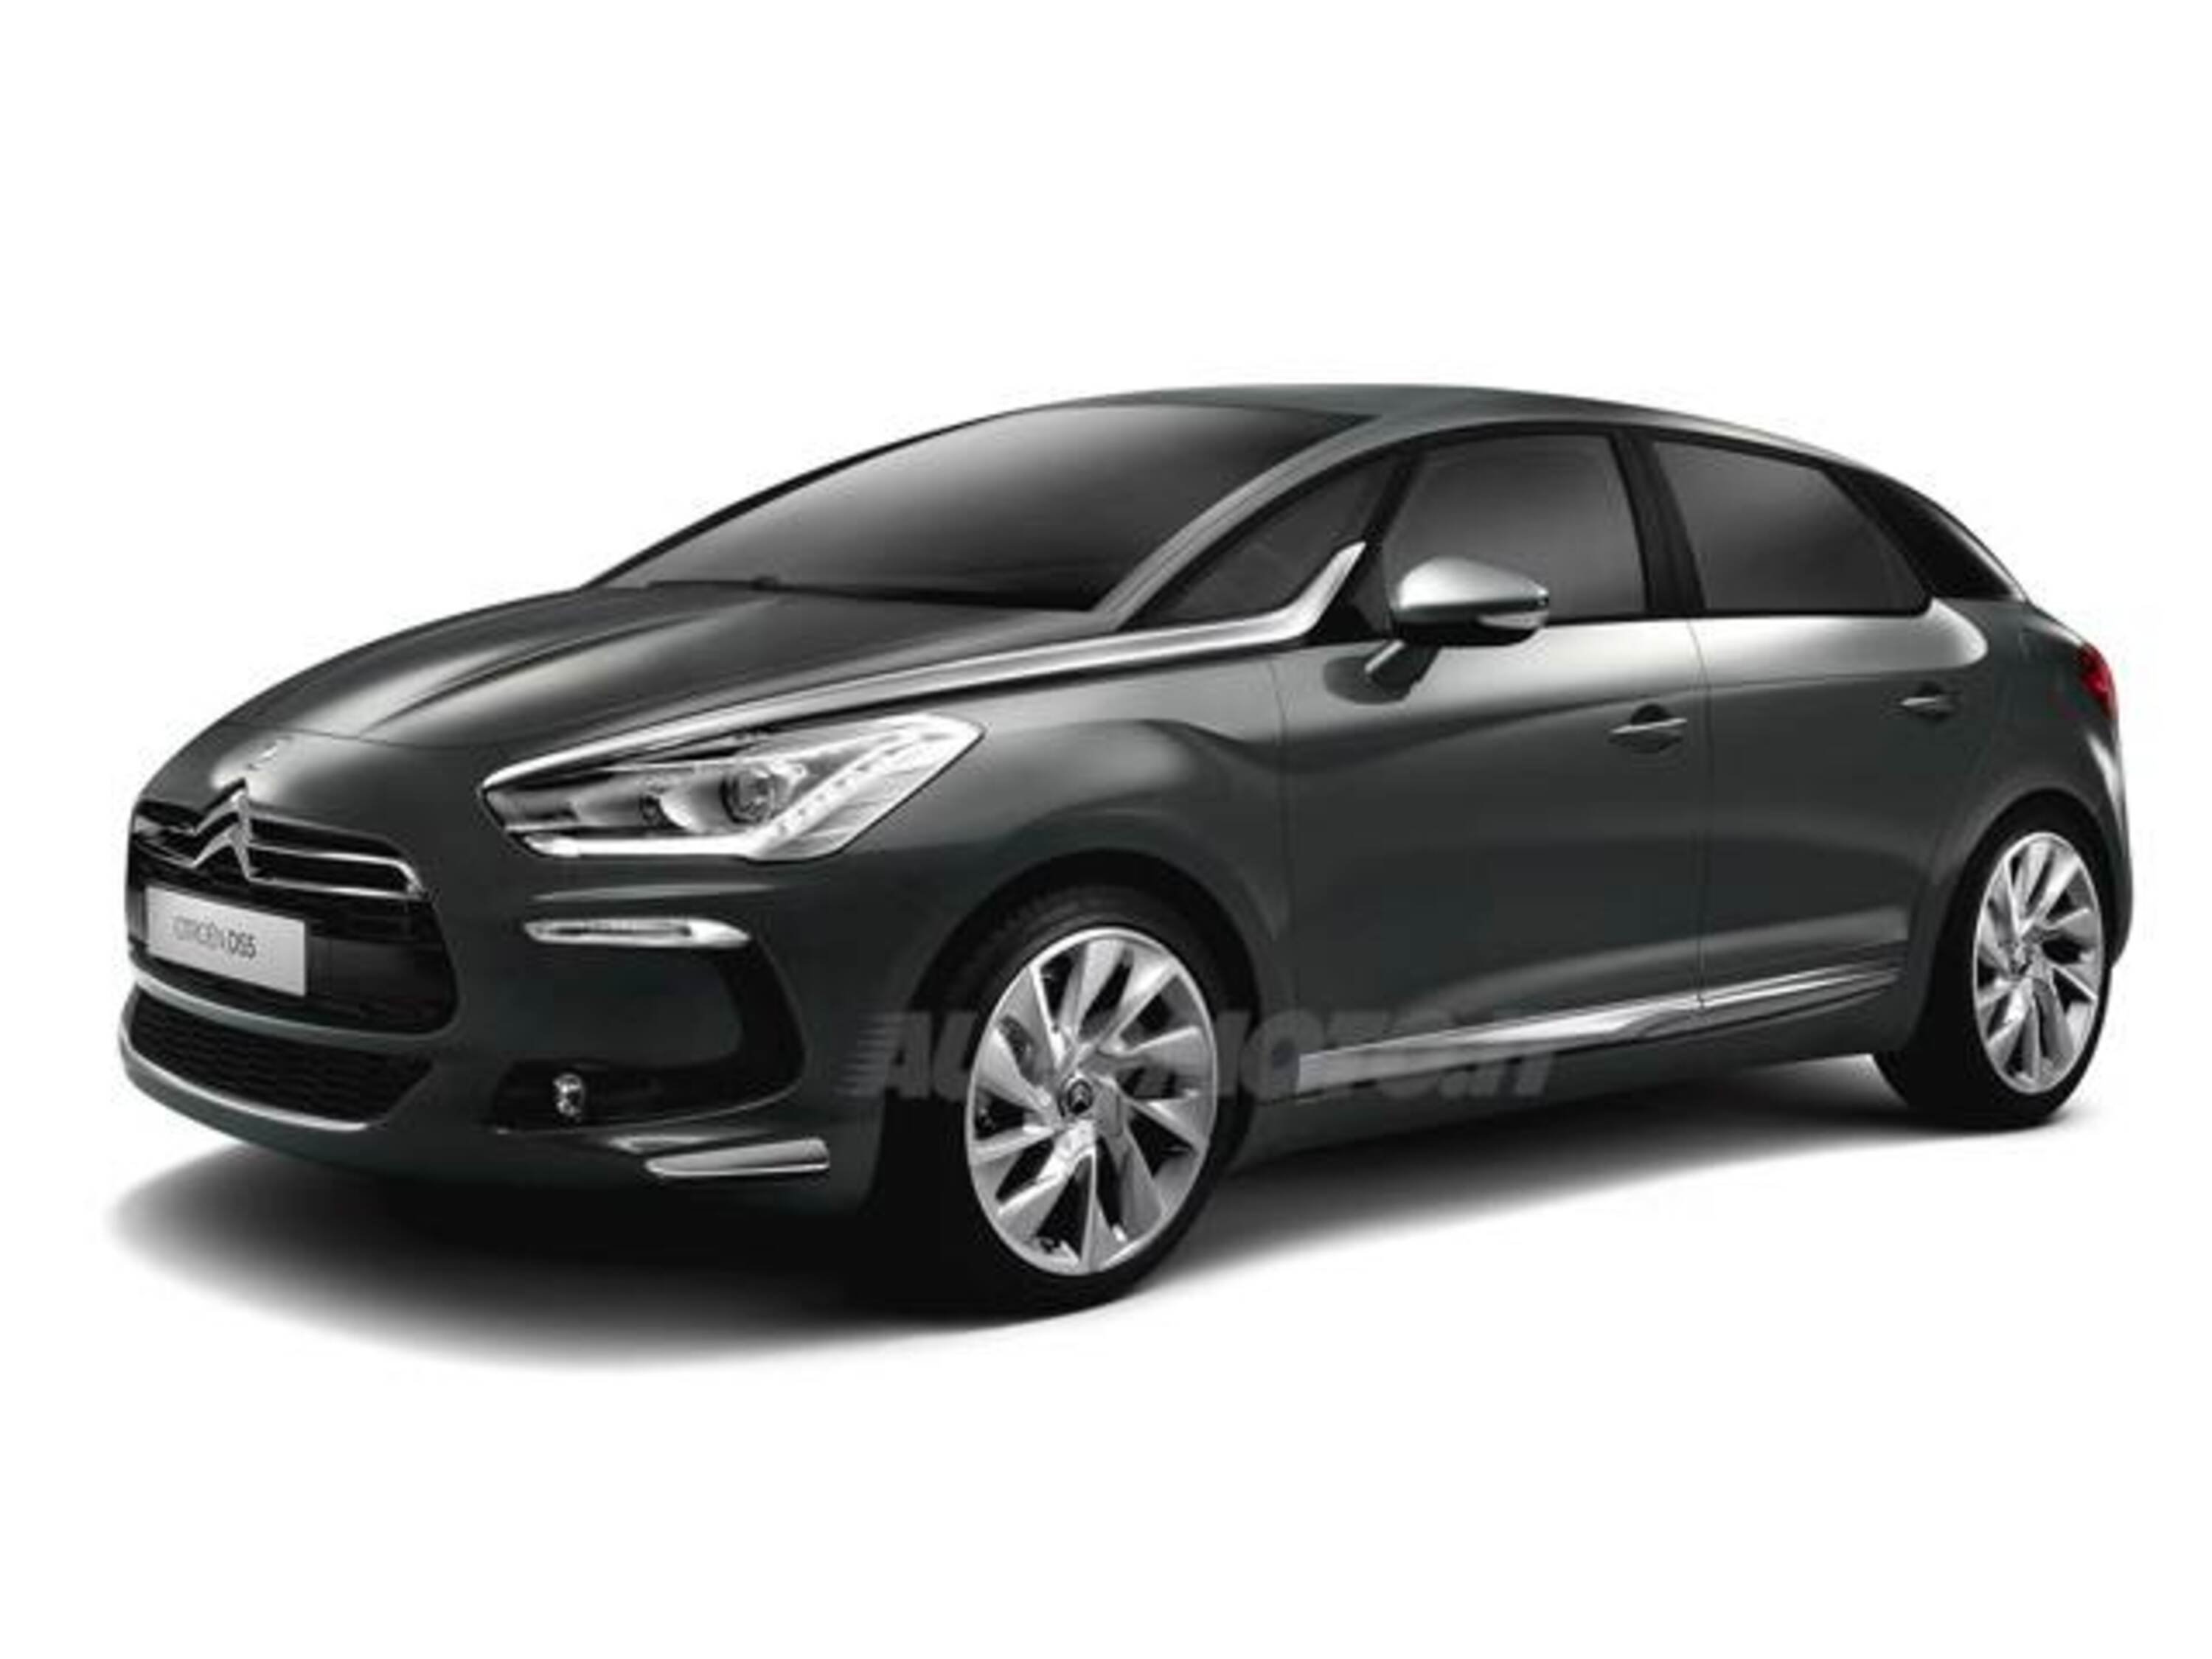 Ds DS 5 DS 5 1.6 e-HDi 110 airdream CMP6 Chic